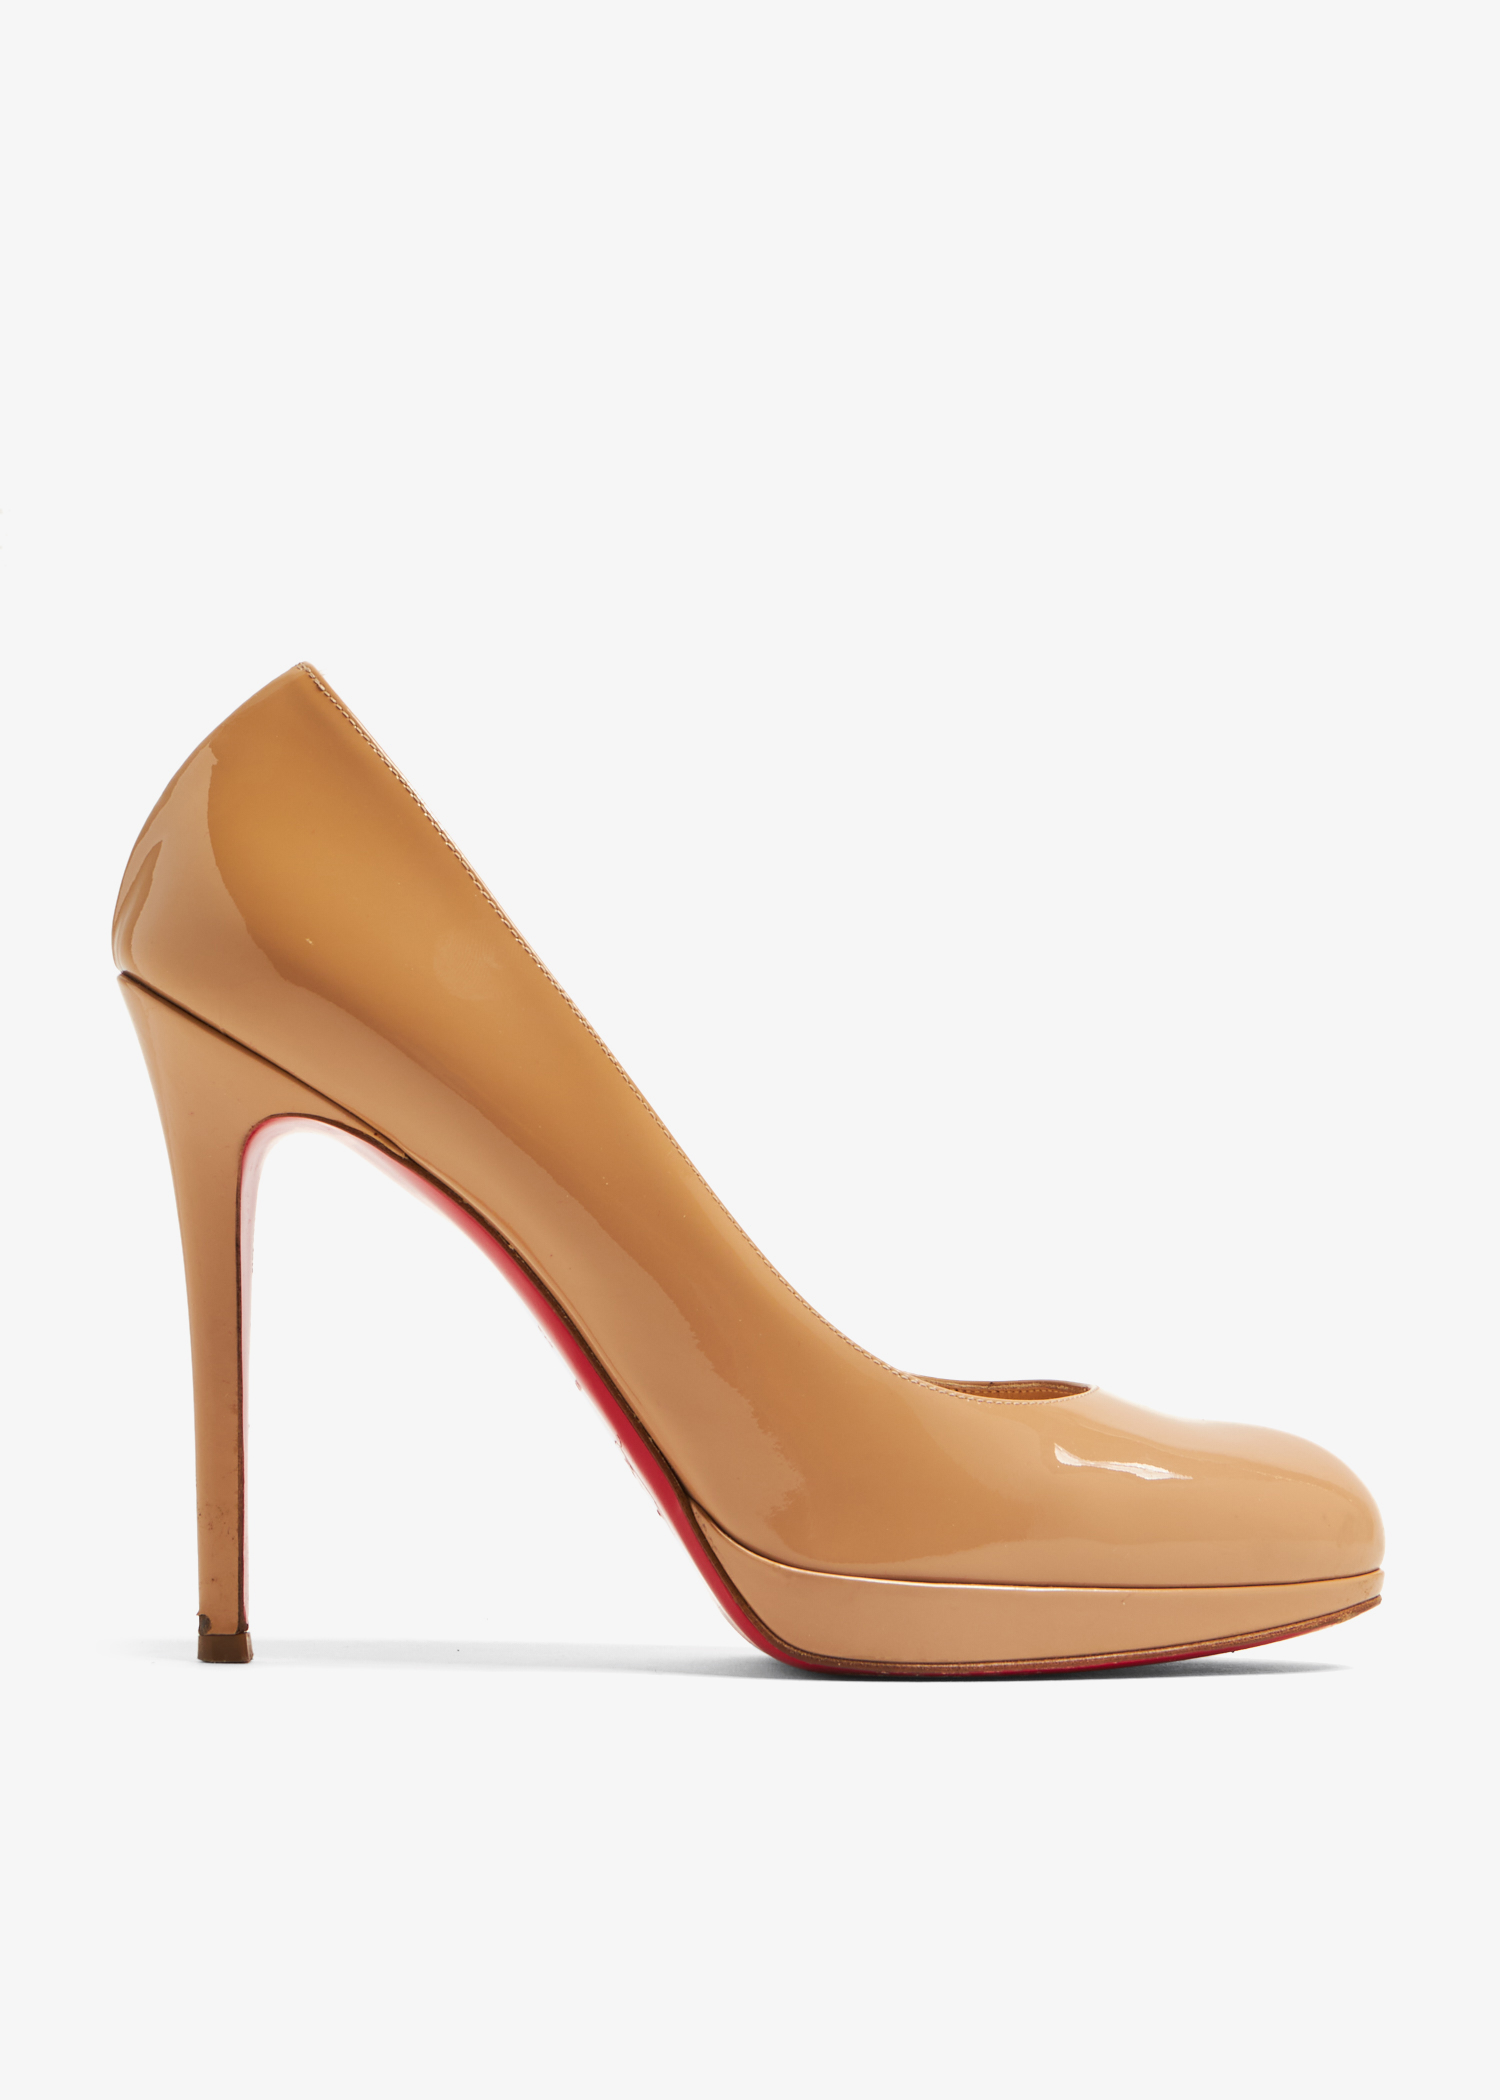 Christian Louboutin Pre-Loved New Simple 120 pumps for Women